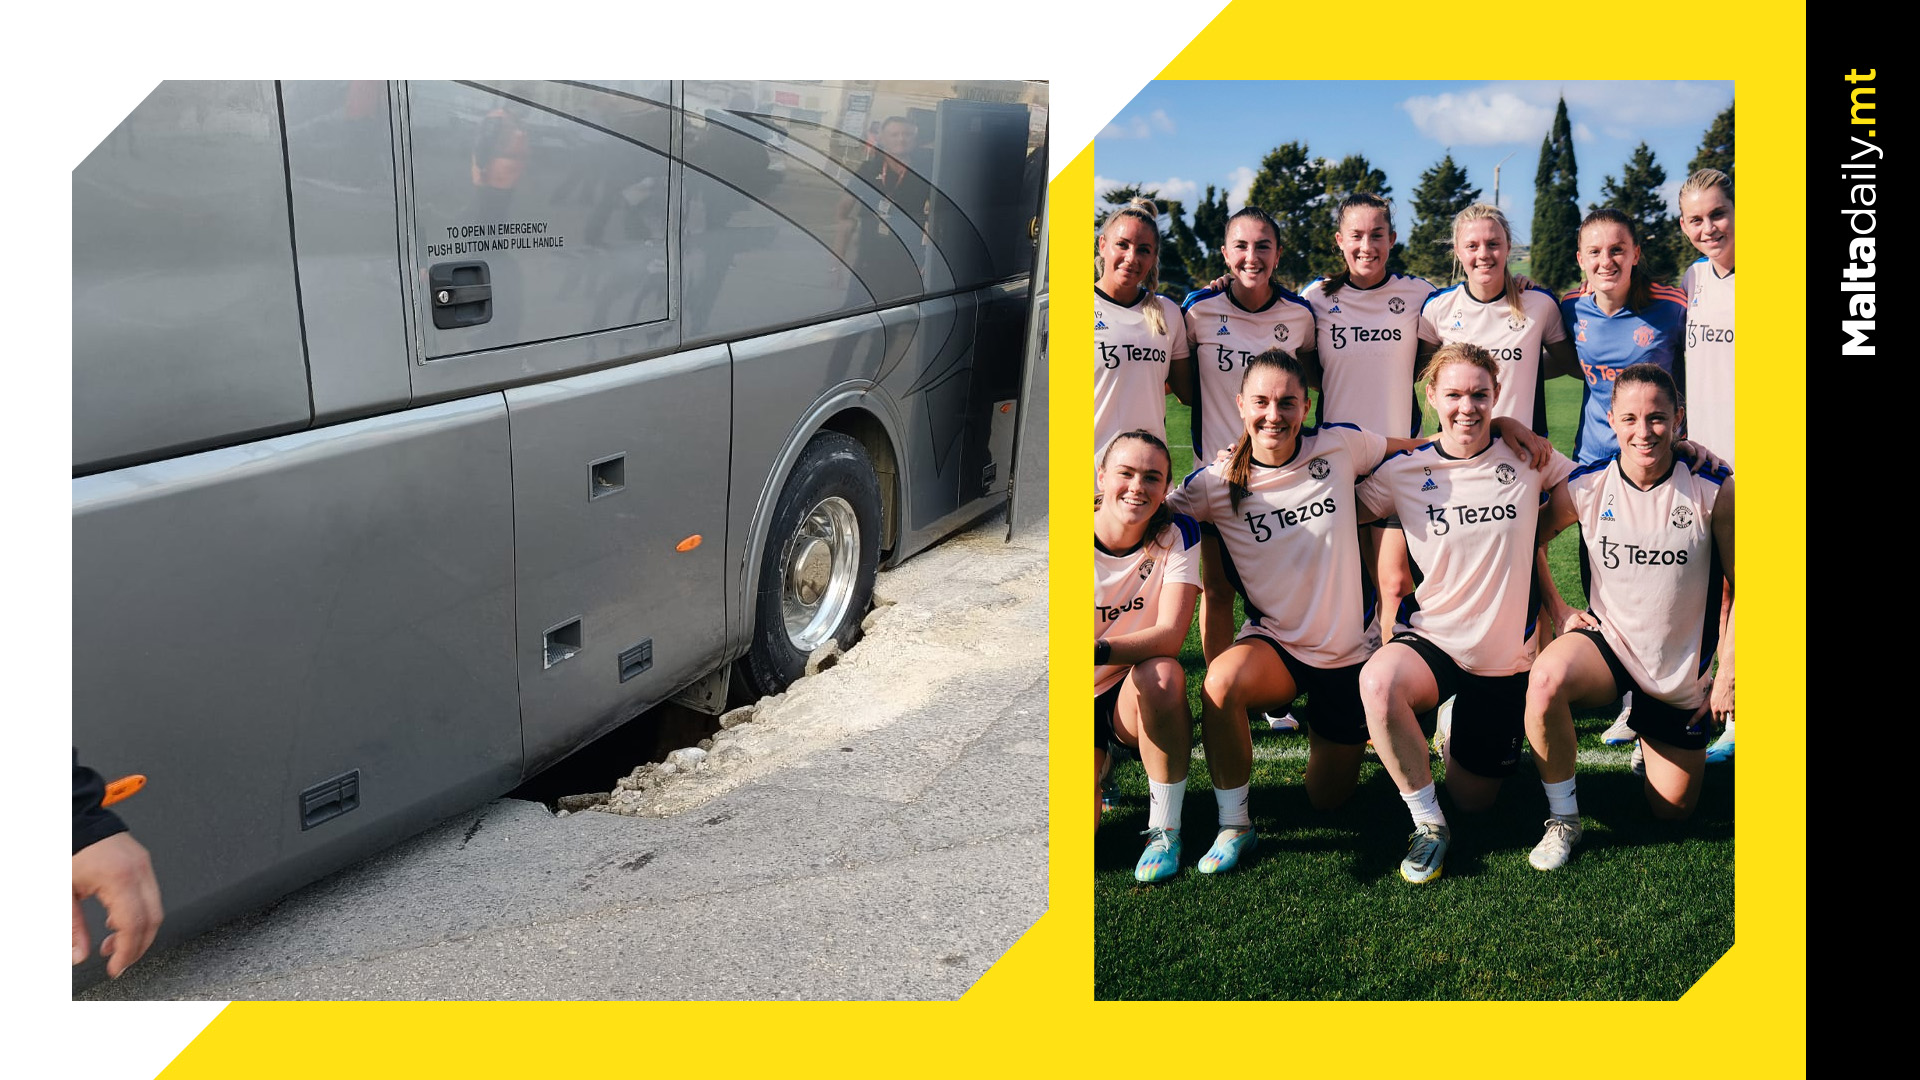 Manchester United women's team left stranded as road collapses on the way to field